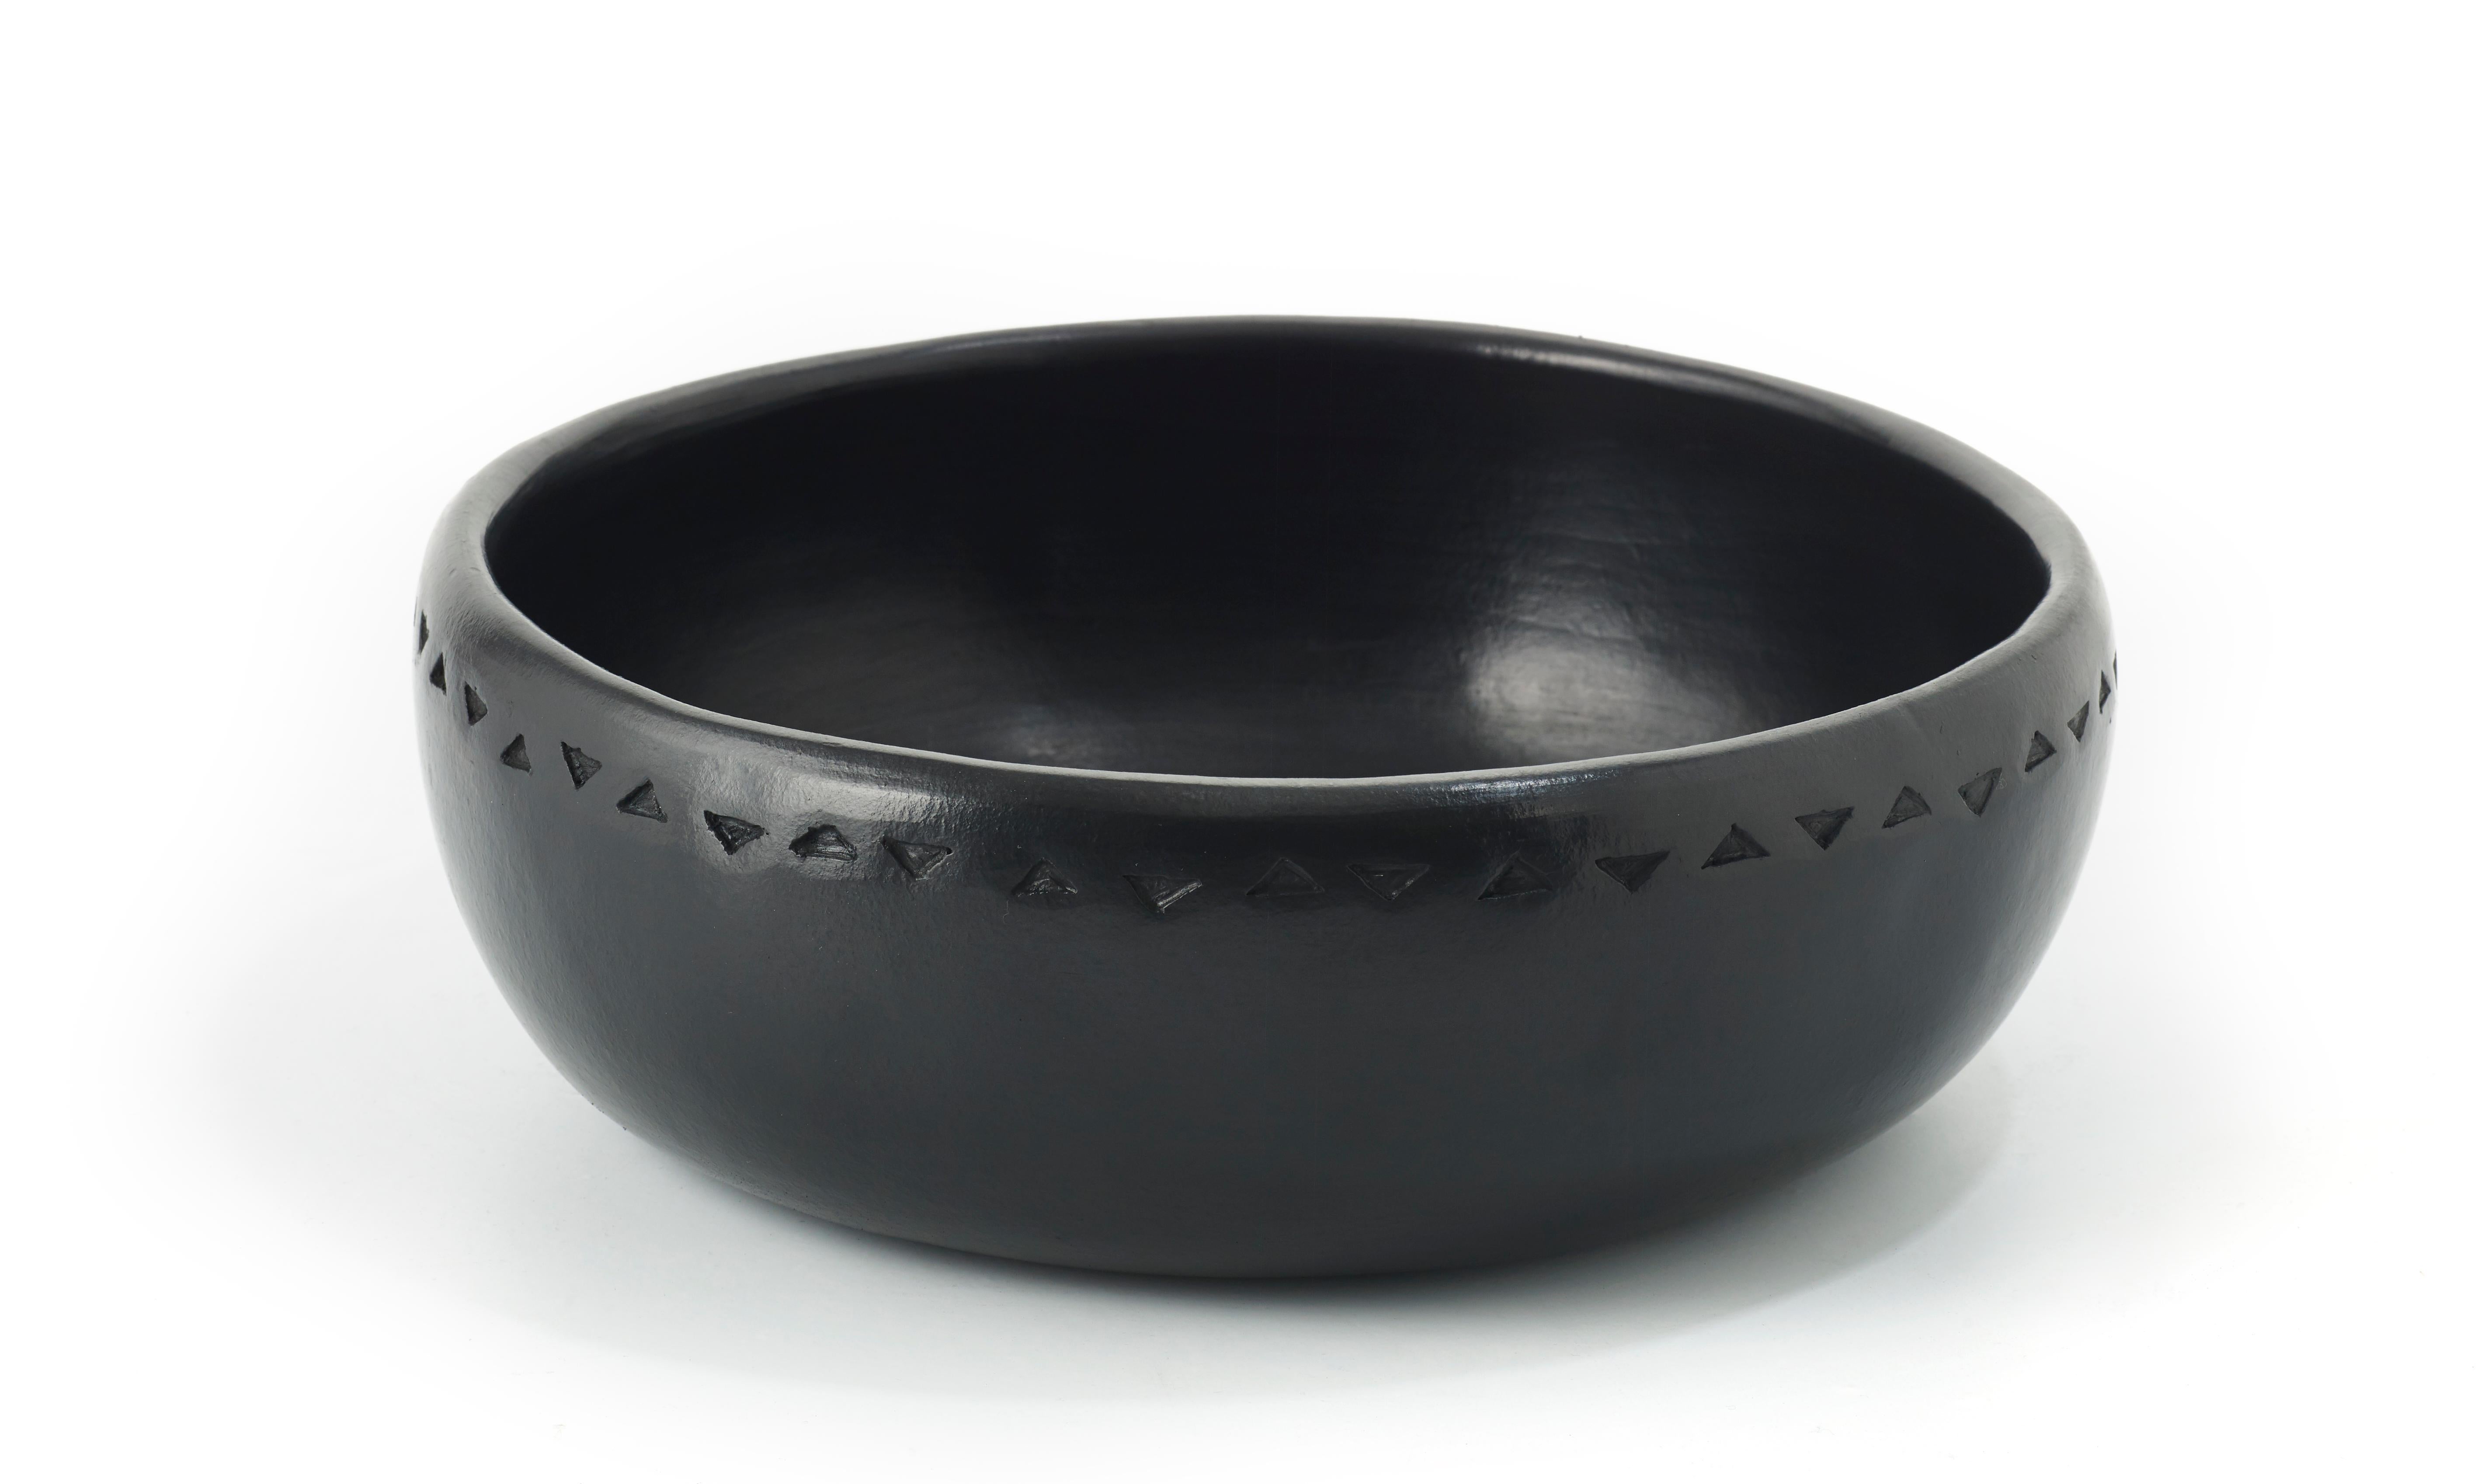 Medium bowl Barro dining by Sebastian Herkner
Materials: heat-resistant black ceramic. 
Technique: glazed. Oven cooked and polished with semi-precious stones. 
Dimensions: diameter 31 cm x height 11 cm 
Available in sizes: Large, small, and X